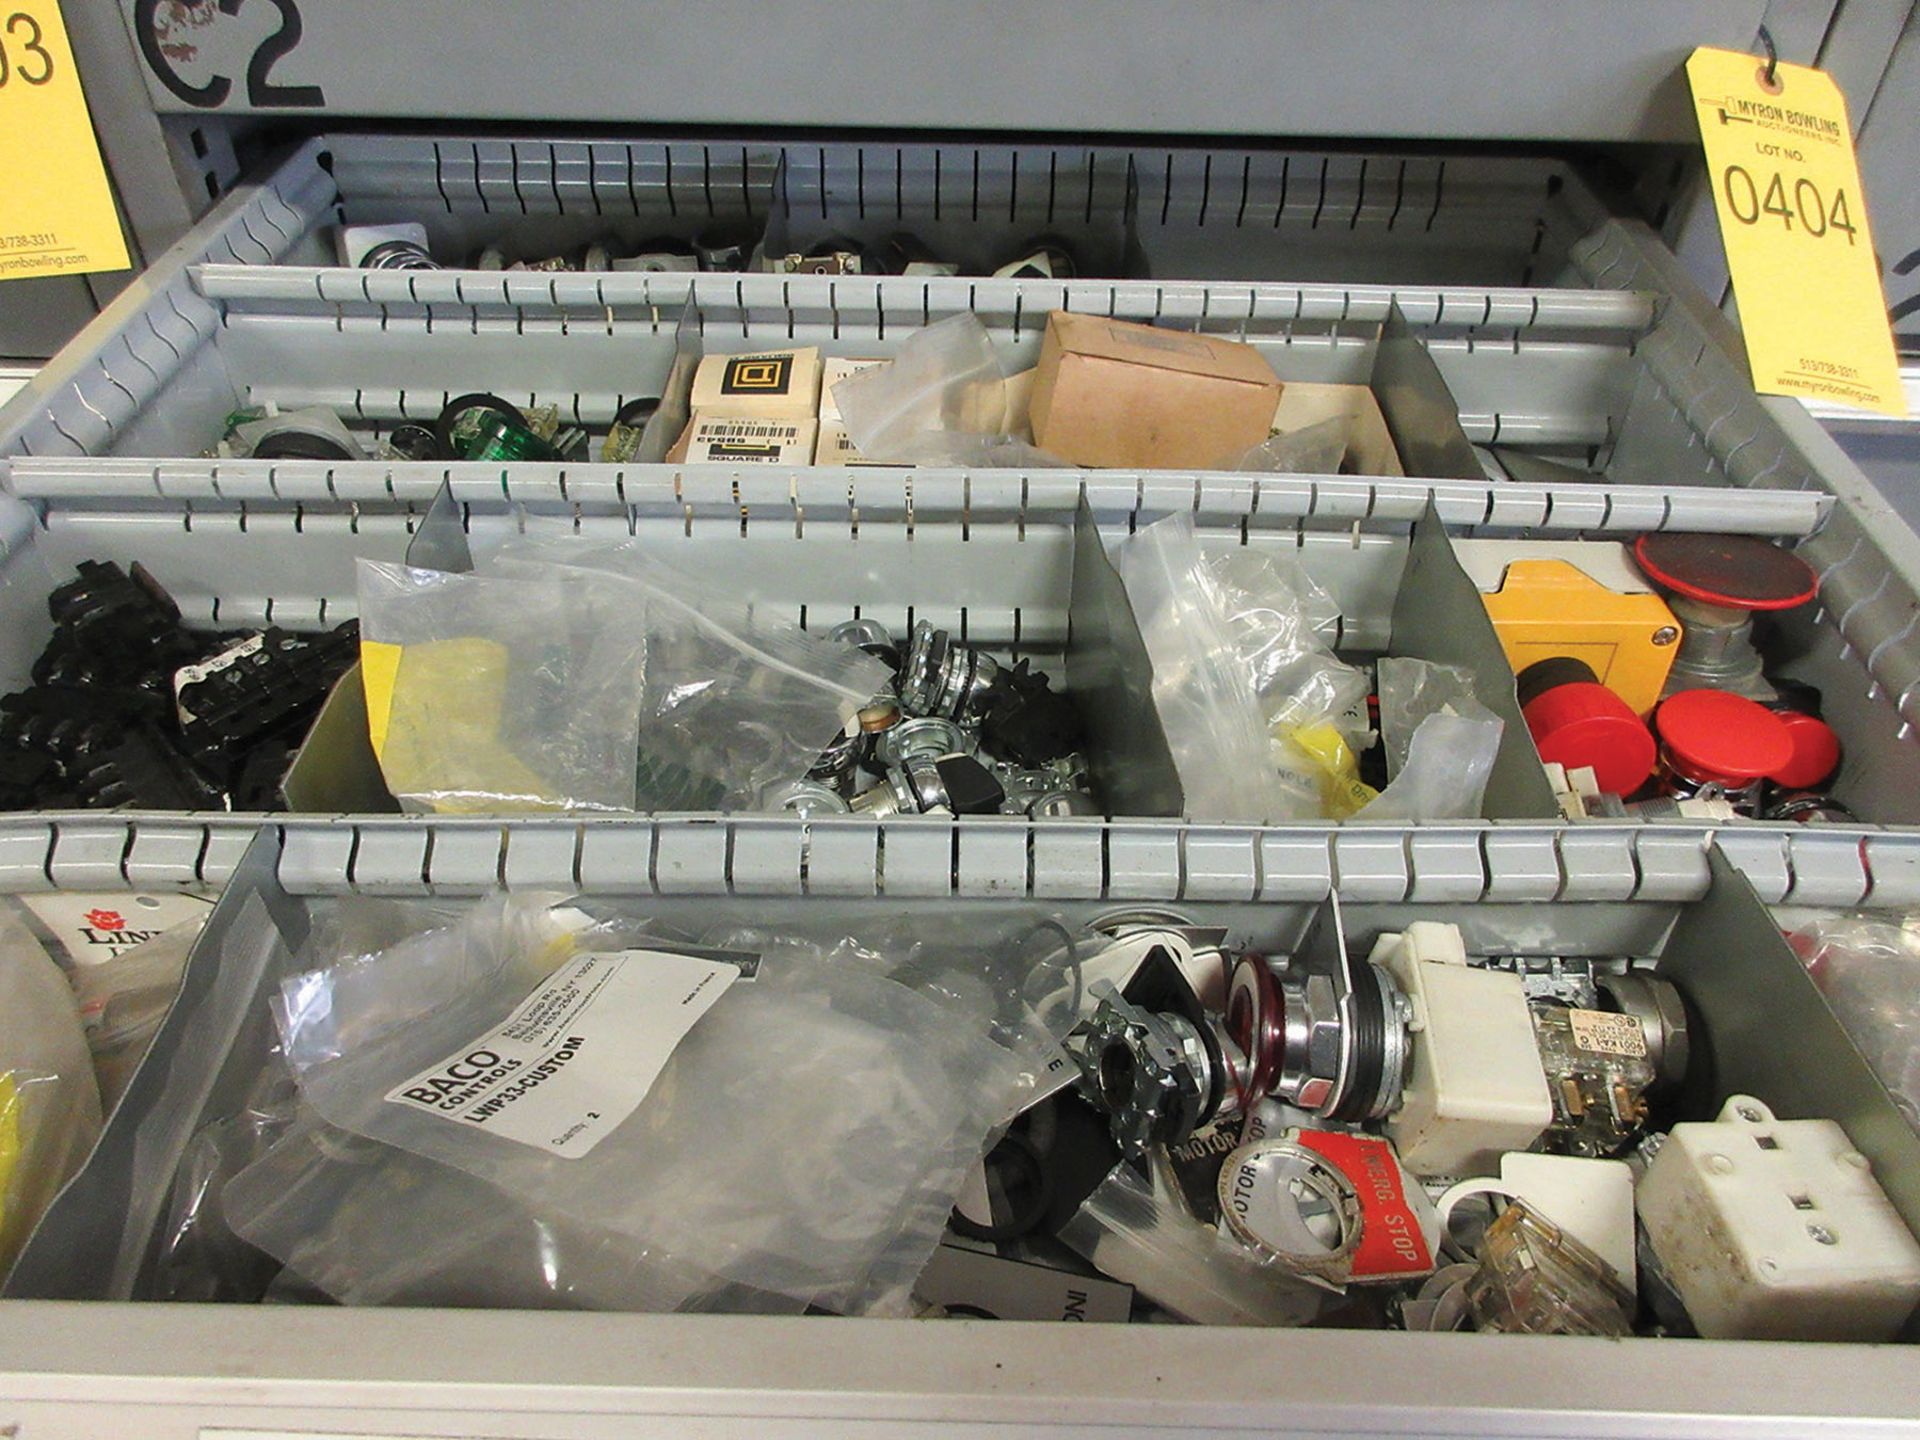 STOR-LOC 8-DRAWER CABINET WITH CONTENTS; RELAYS, SWITCHES, CONDUIT FITTINGS, AND COVERS - Image 3 of 5